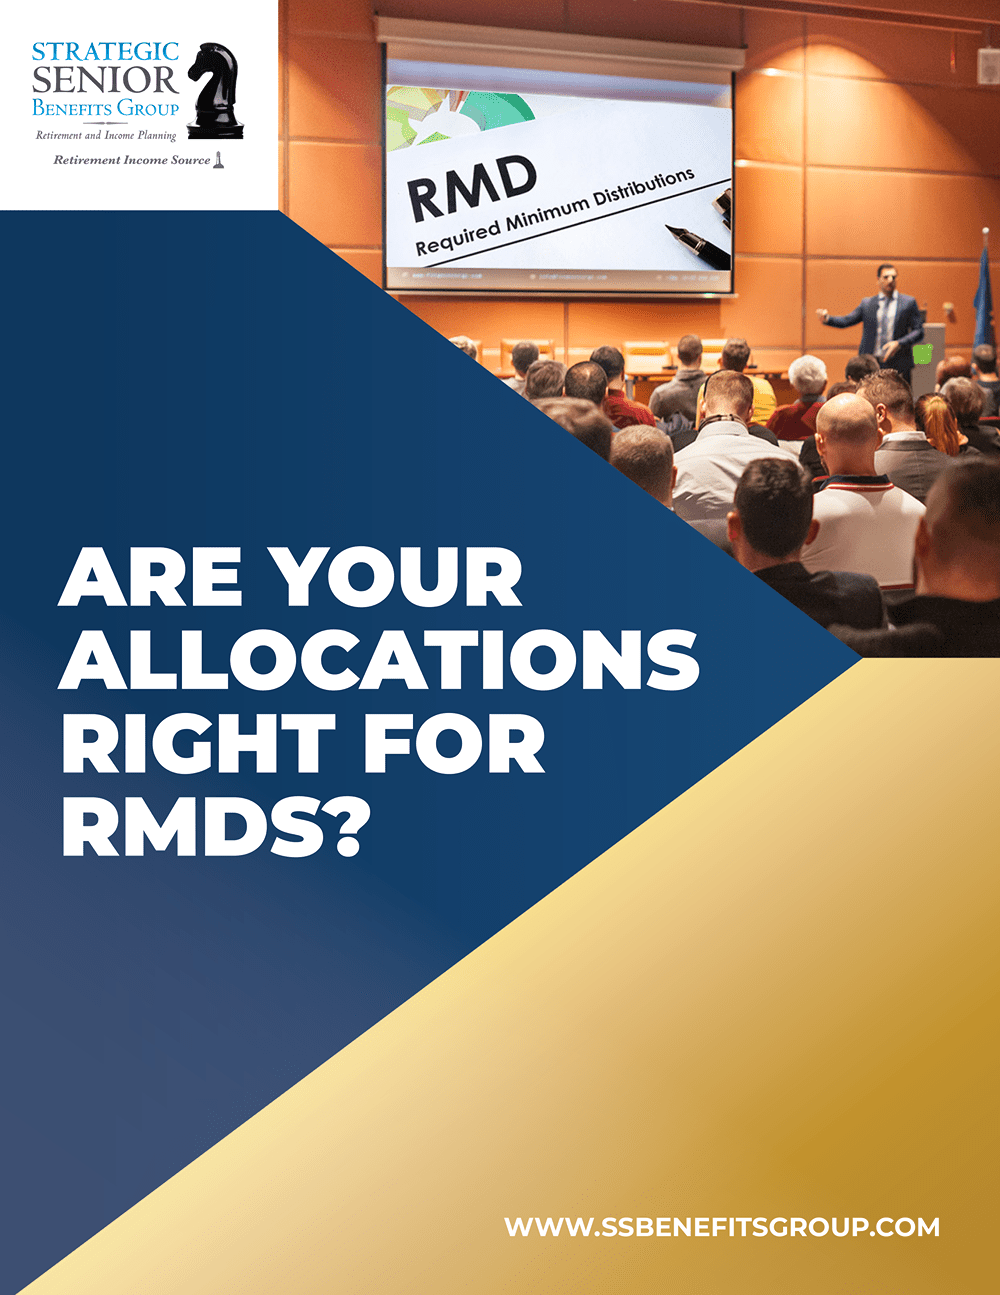 Strategic Senior Benefits Group - Are Your Allocations Right for RMDs-1